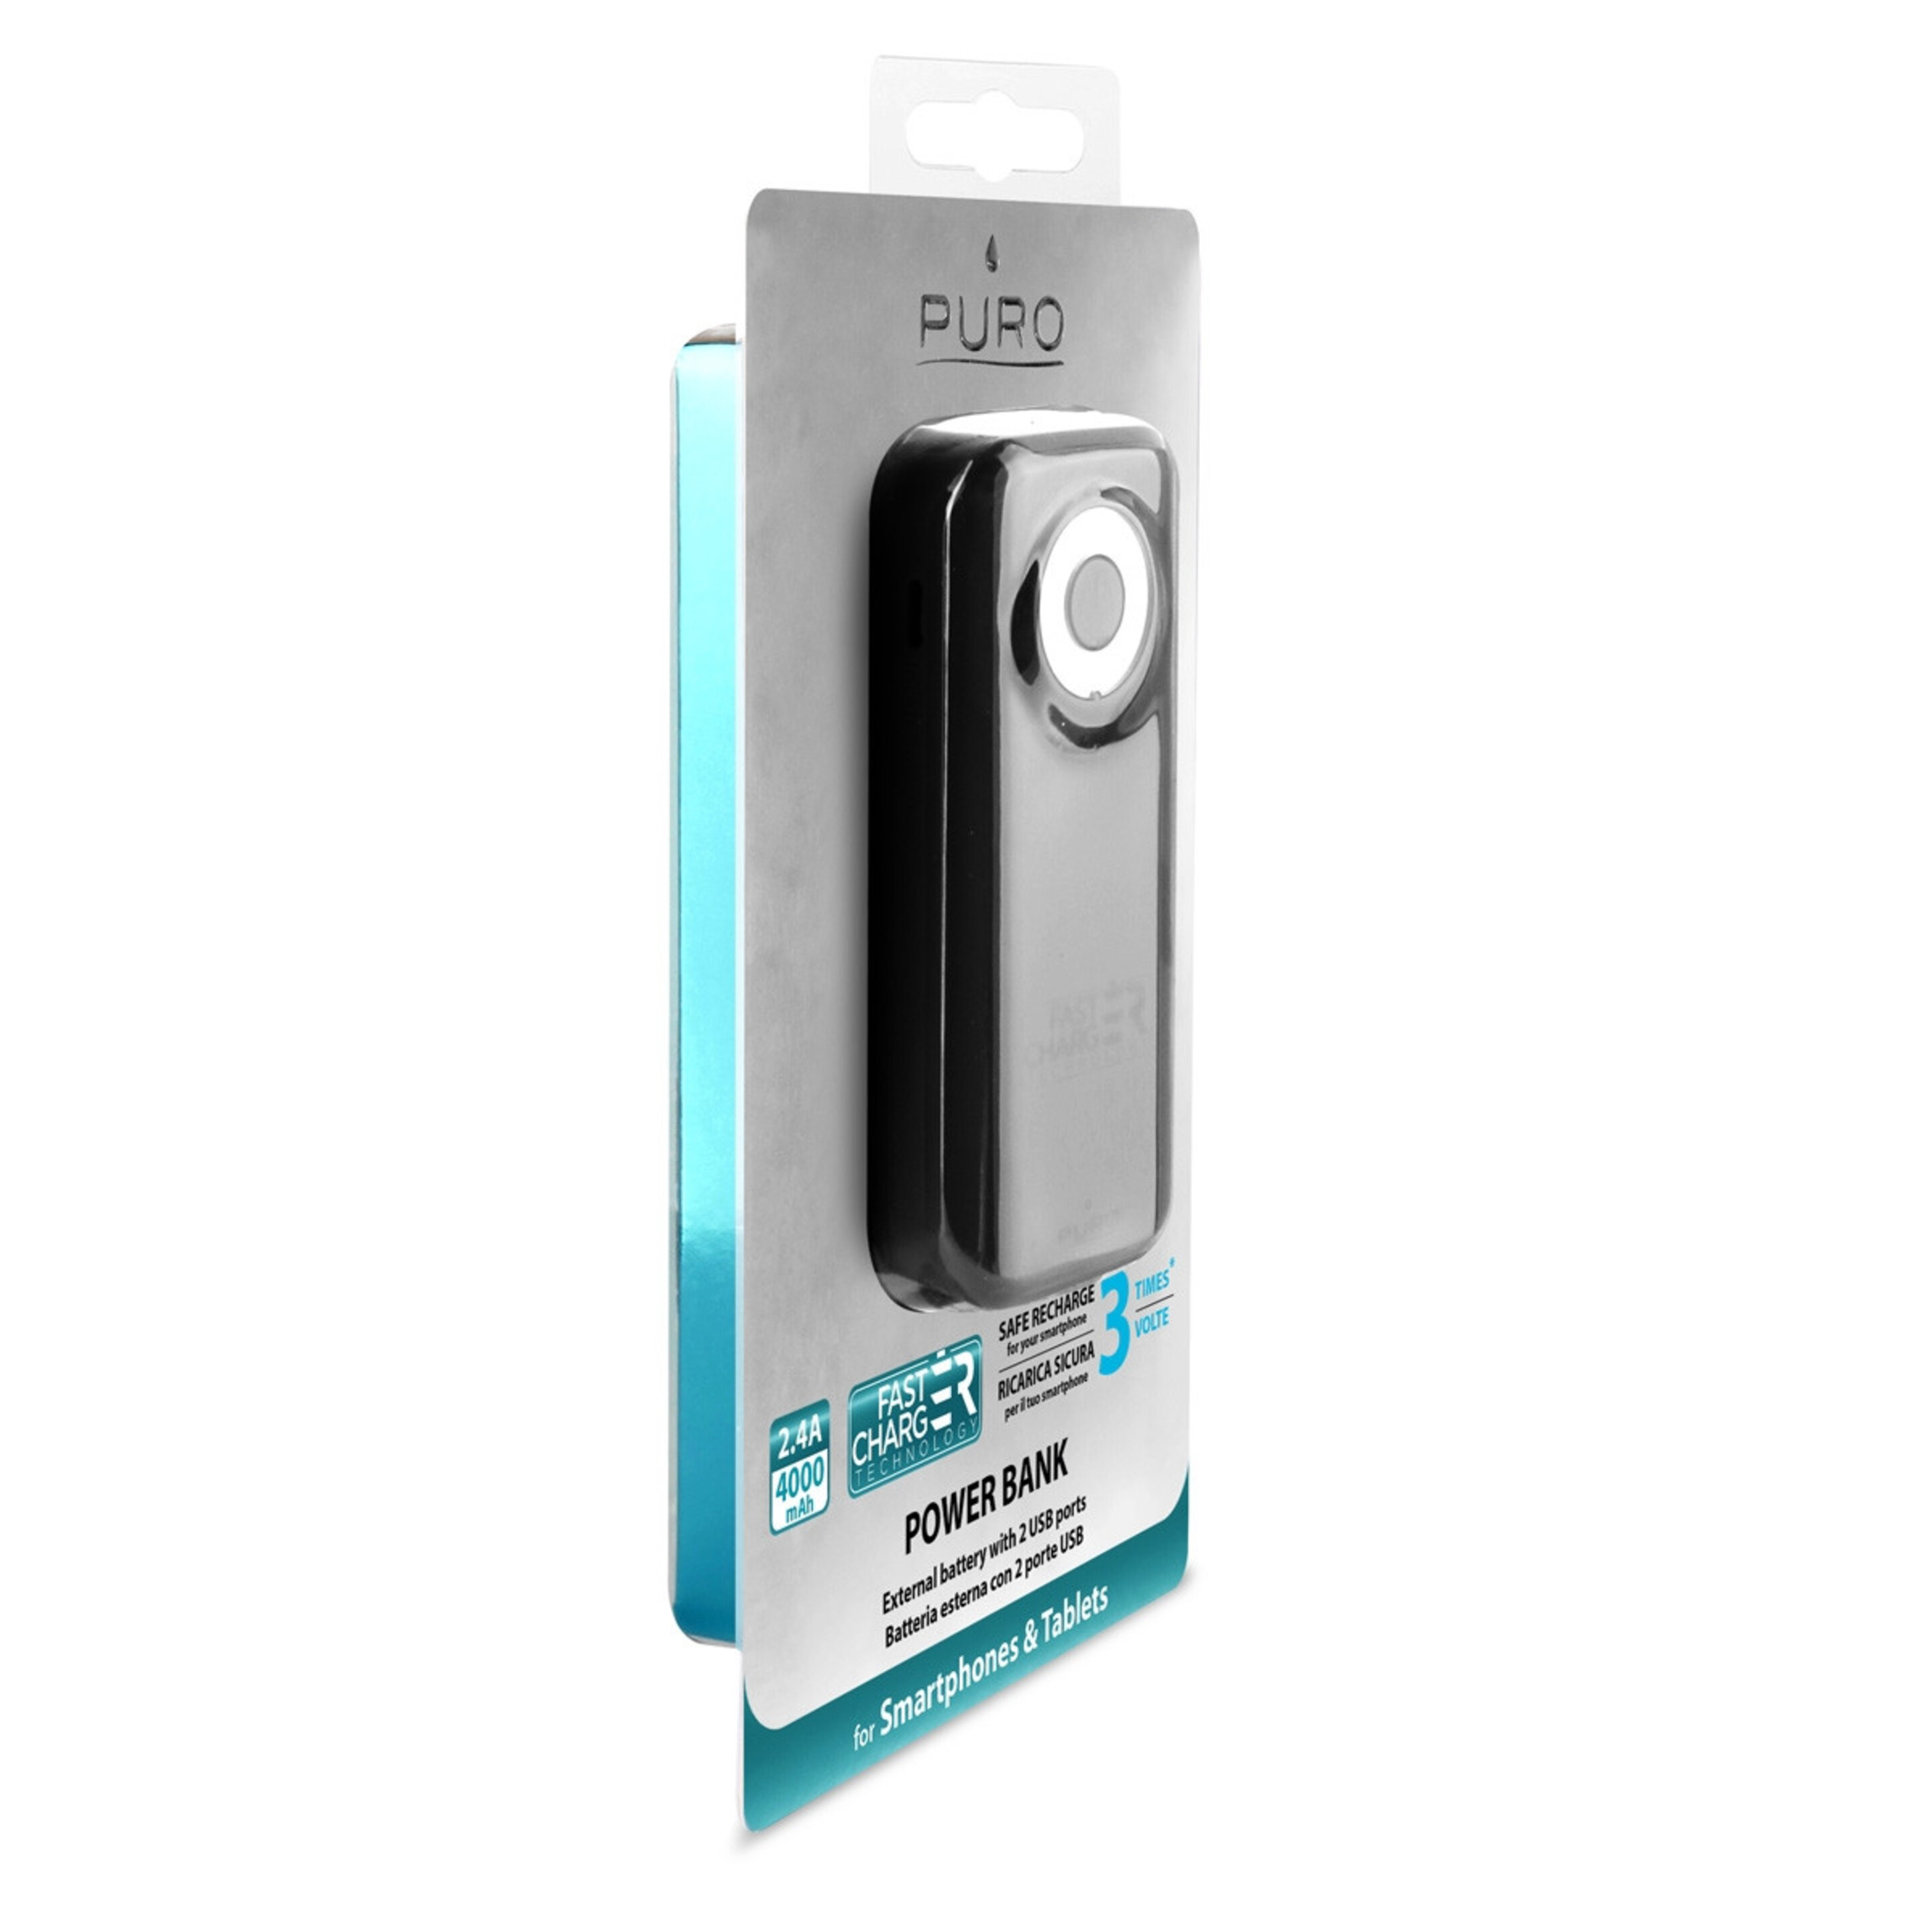 Puro Power Bank 4000 Mah 2 Puertos 2.4a Cable Usb-micro Usb Fast Charge Negra